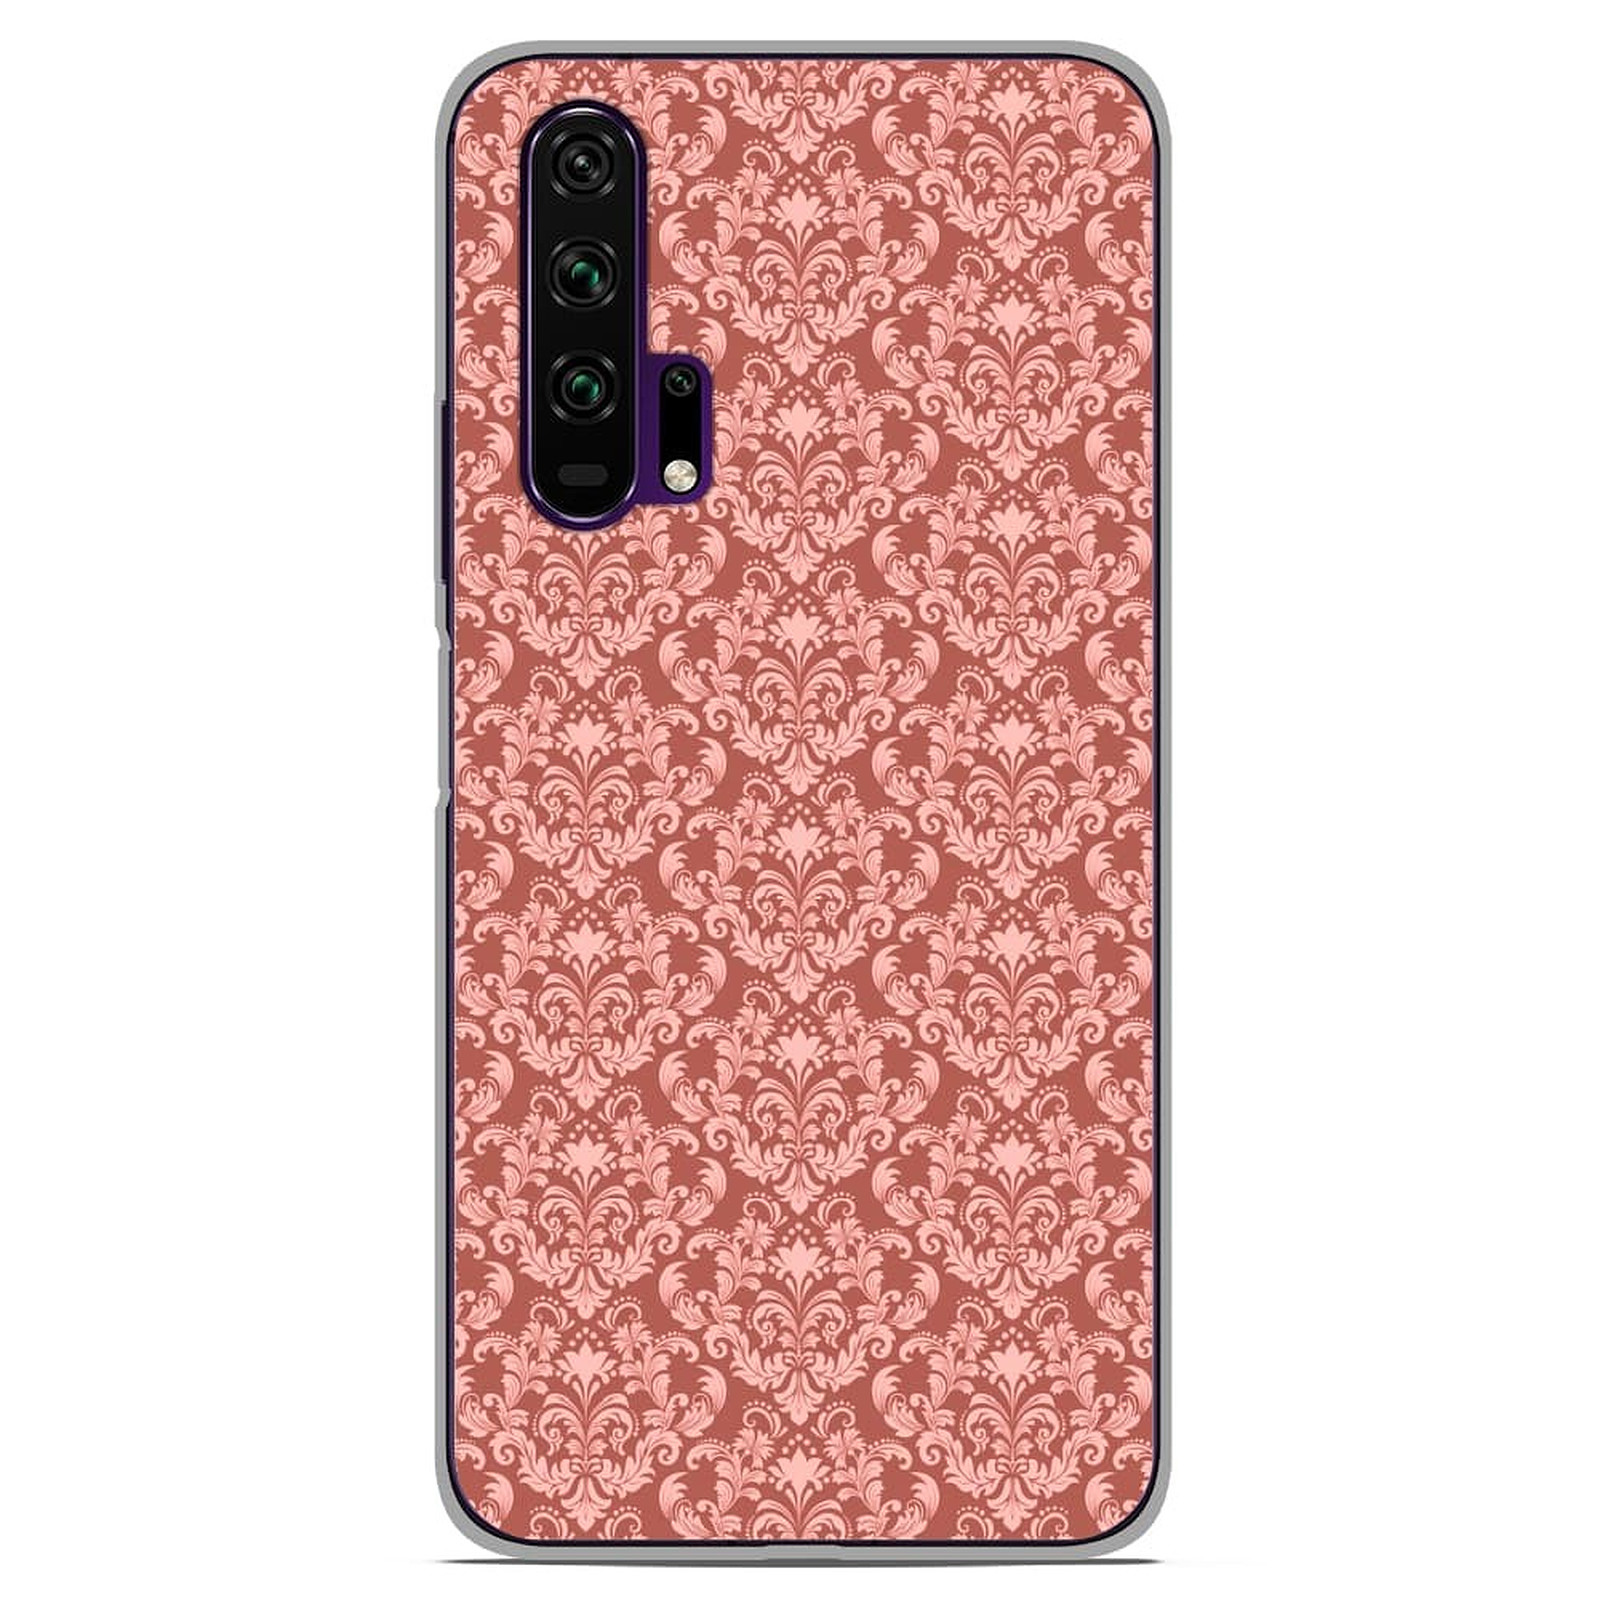 1001 Coques Coque silicone gel Huawei Honor 20 Pro motif Baroque - Coque telephone 1001Coques